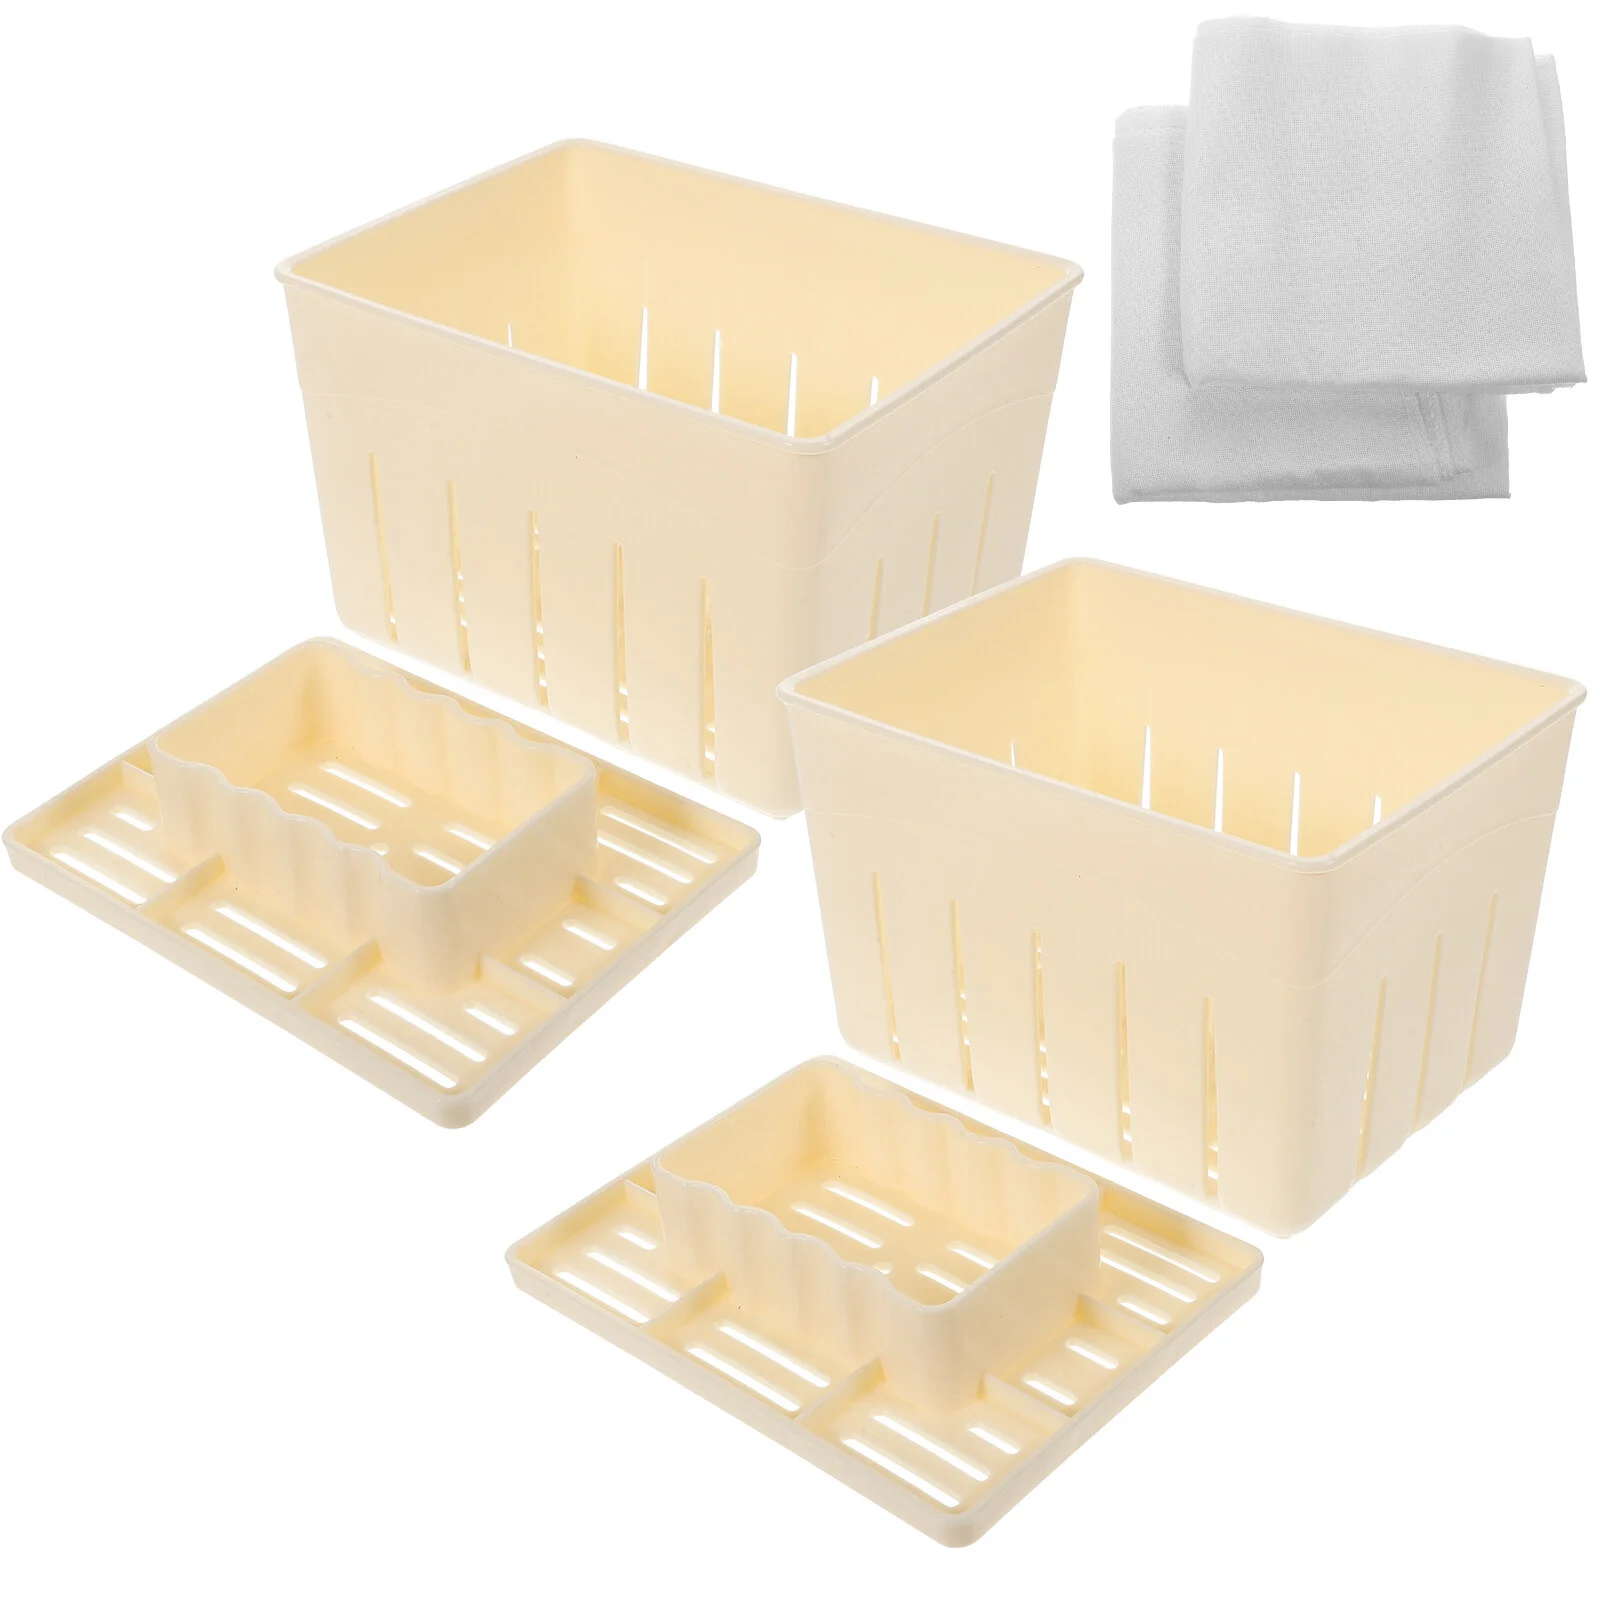 

2 Sets Homemade Tofu Stamper DIY Kits Pressing Mold Making Molds Moulds Tools Plastic Pp Supplies Bean Curd Makers Kitchen